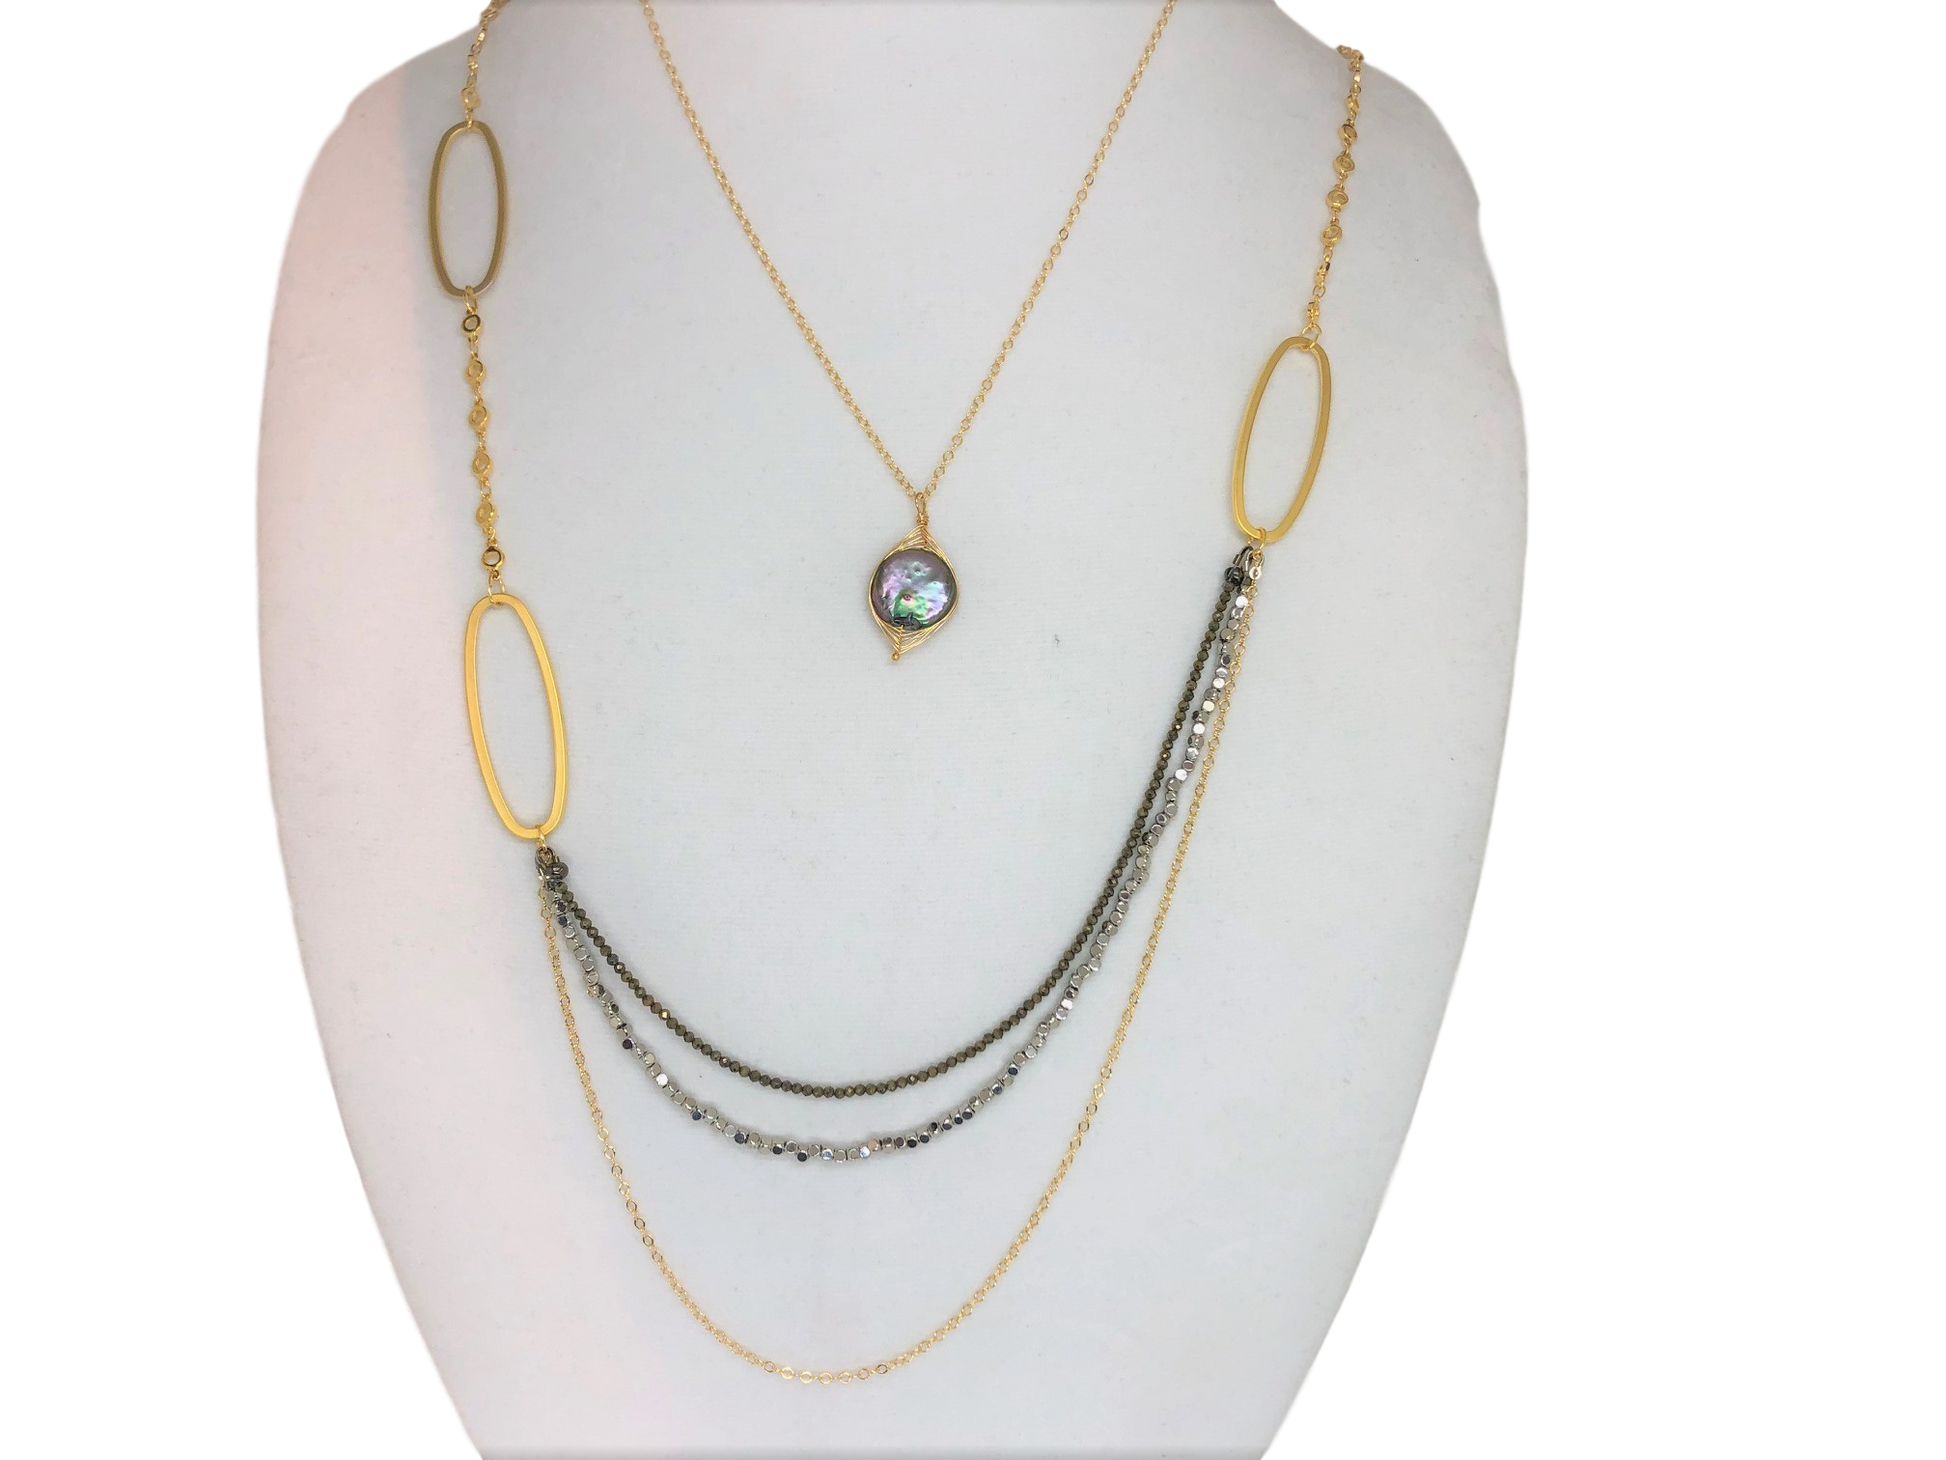 Triple Chain Necklace - Emmis Jewelry, Necklace, [product_color]